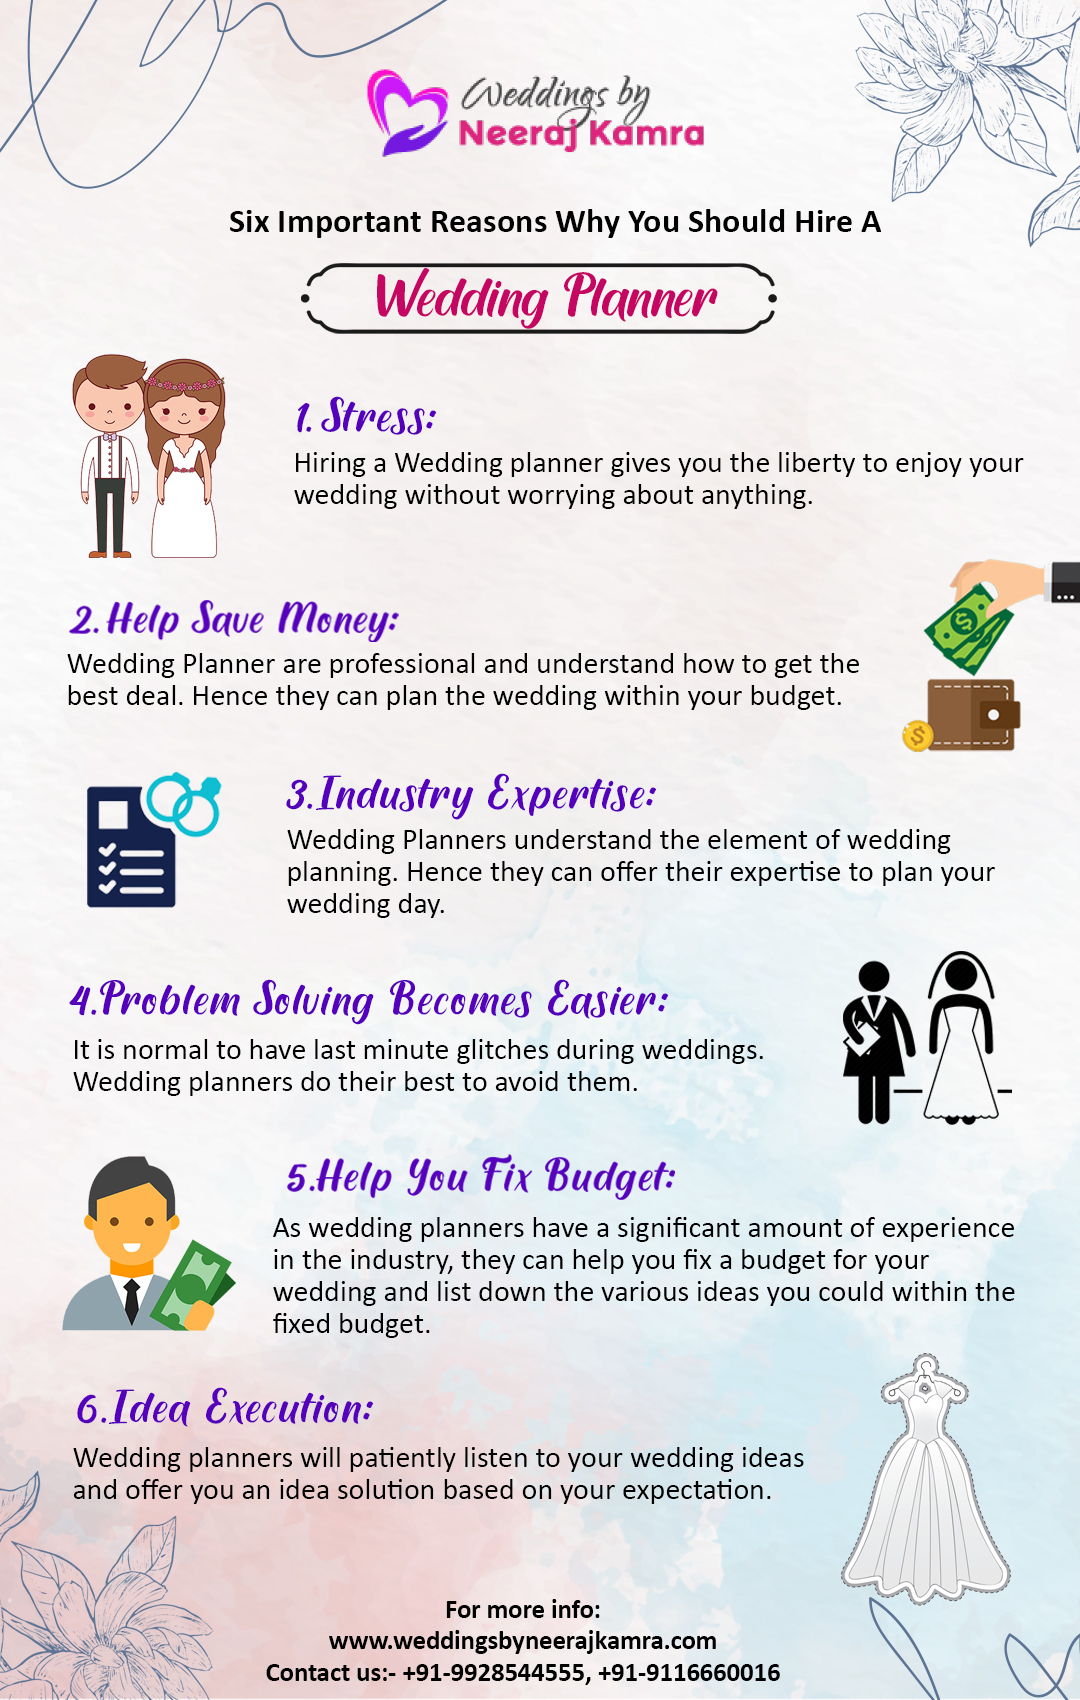 Wedding Planning Advice - The Top Wedding Experts on Planning Your